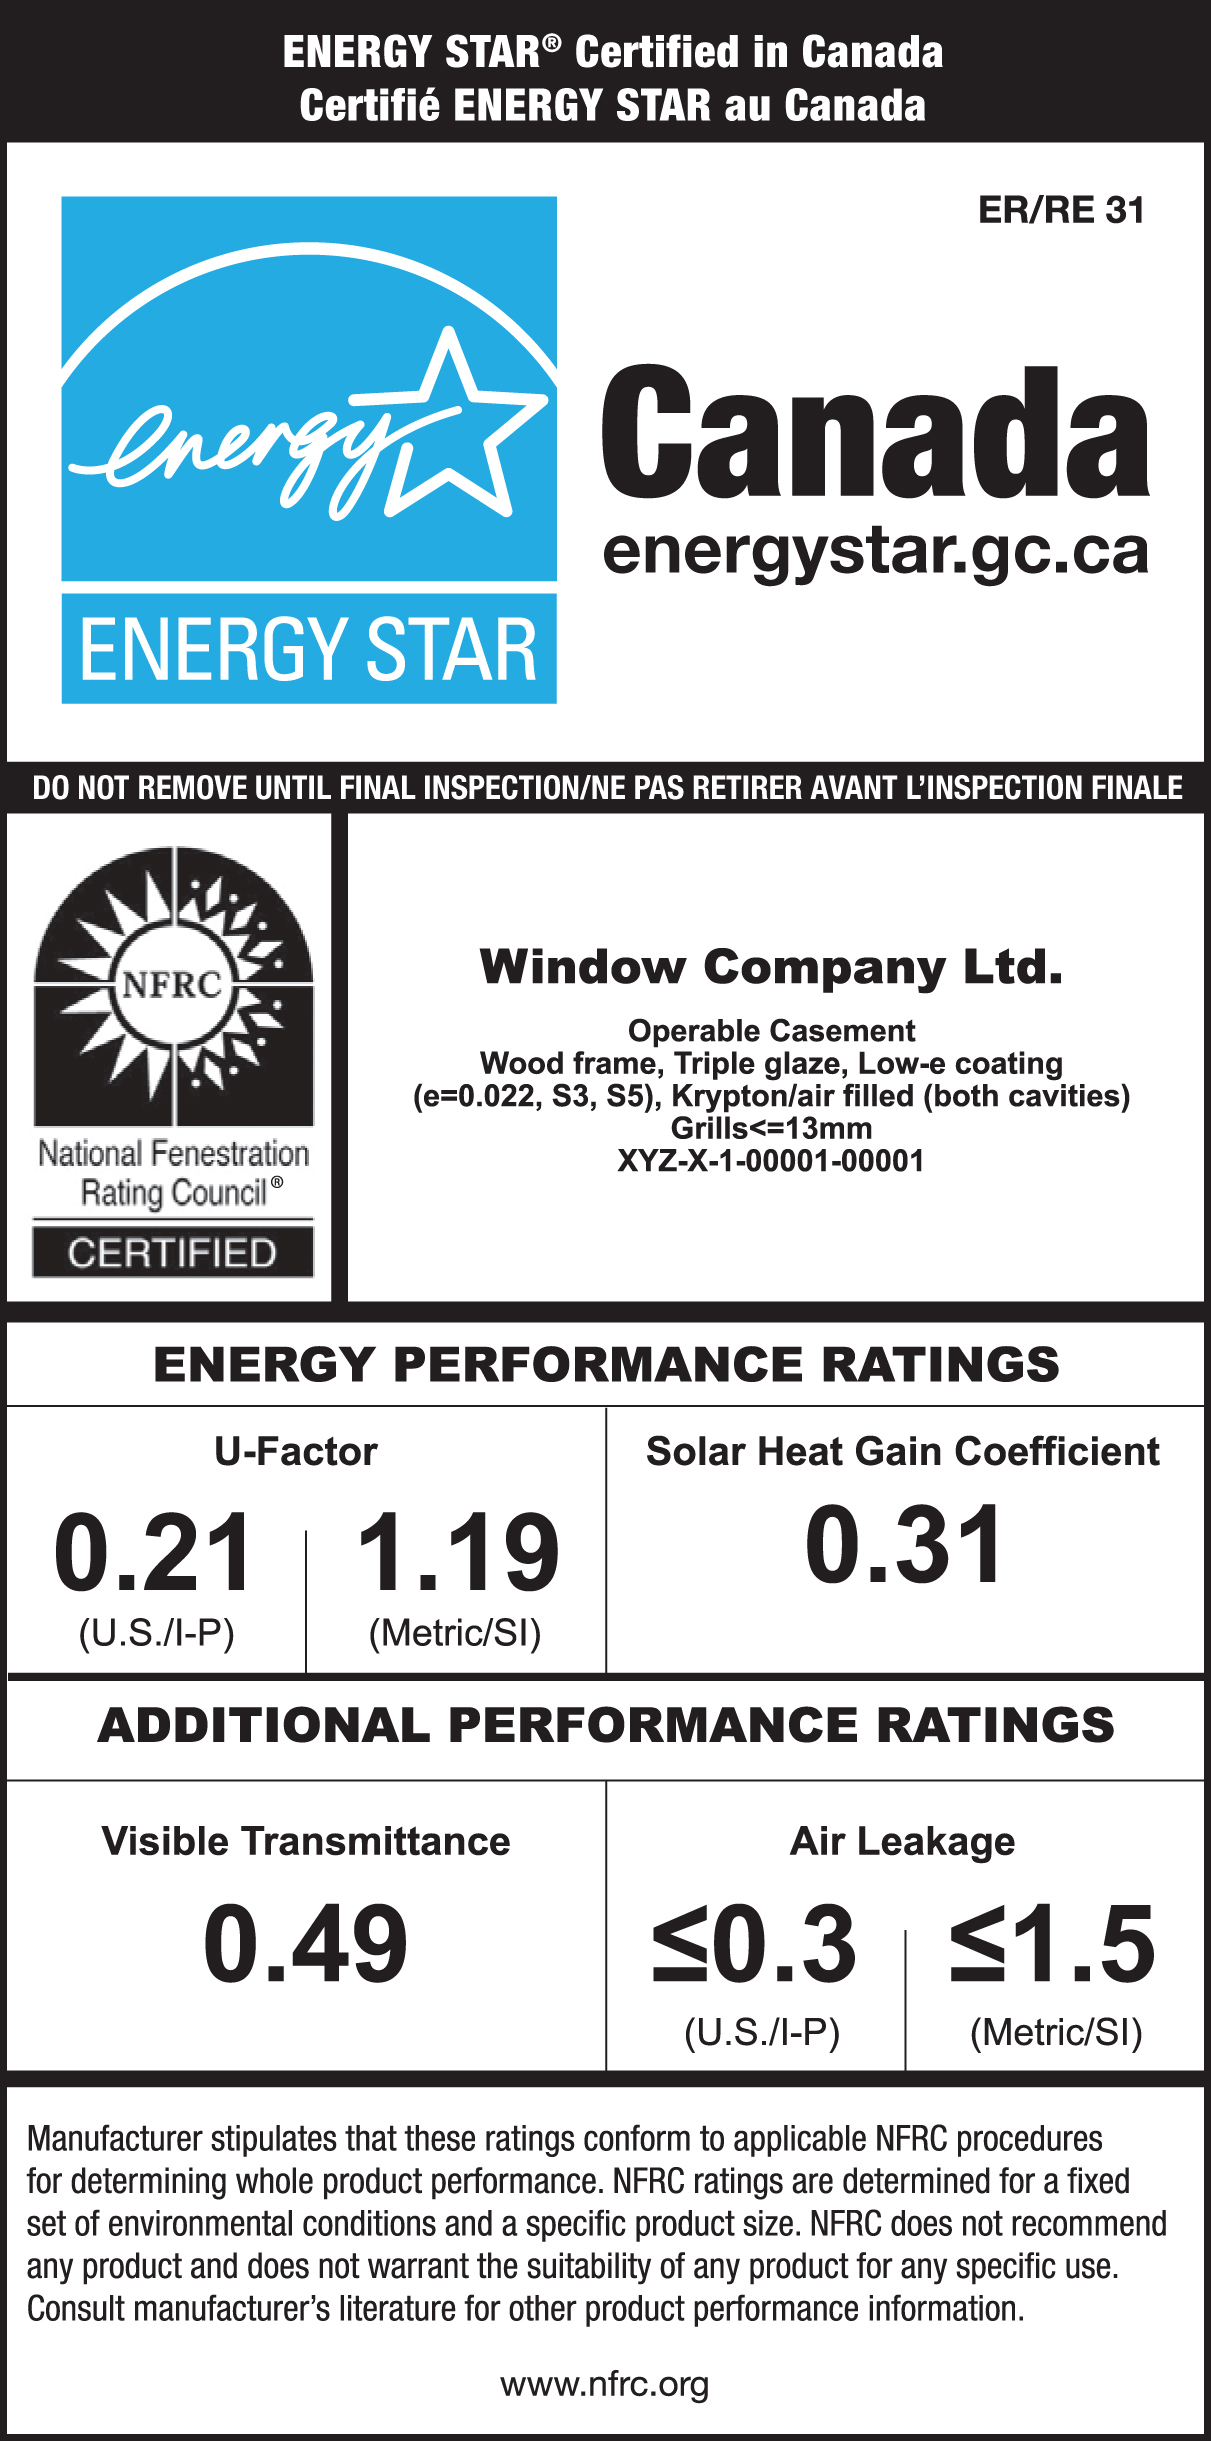 Sample ENERGY STAR label with no map indicating that the product is certified for Zones 1, 2 and 3 with the energy performance label showing the specific performance ratings, brand name, model description and the certification mark of NFRC.